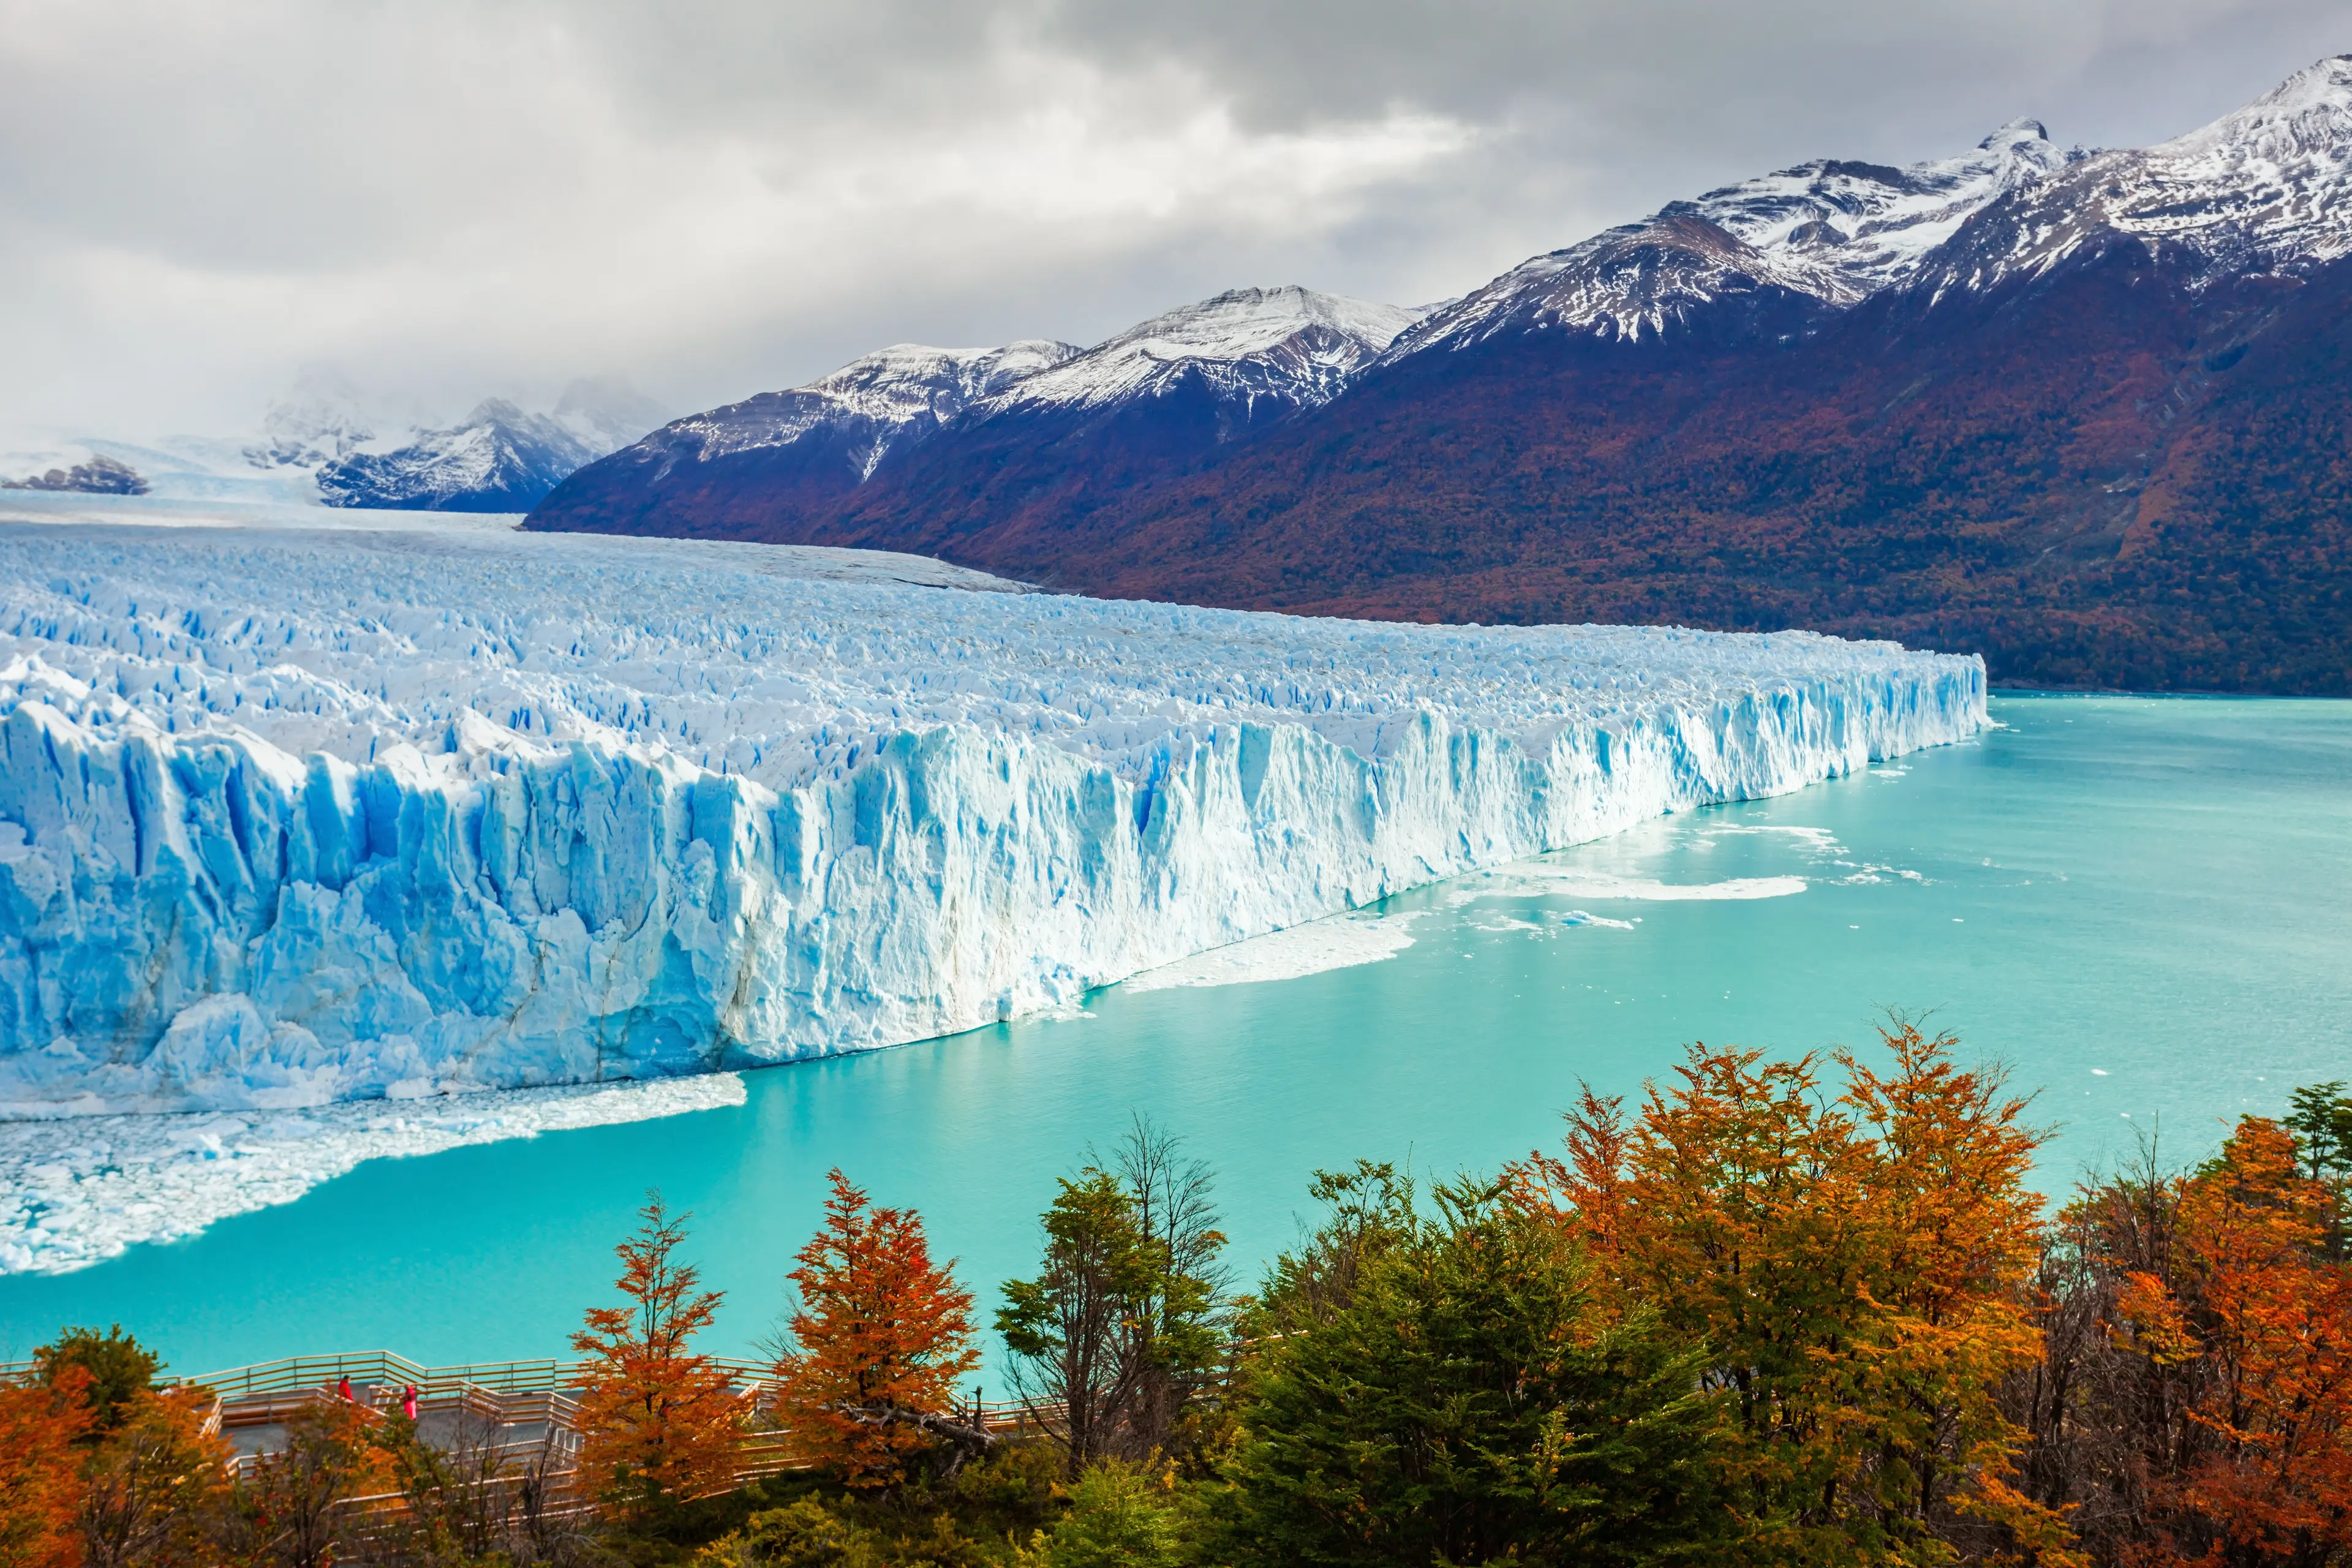 2-Day Exploration Guide to Argentine Patagonia, Argentina